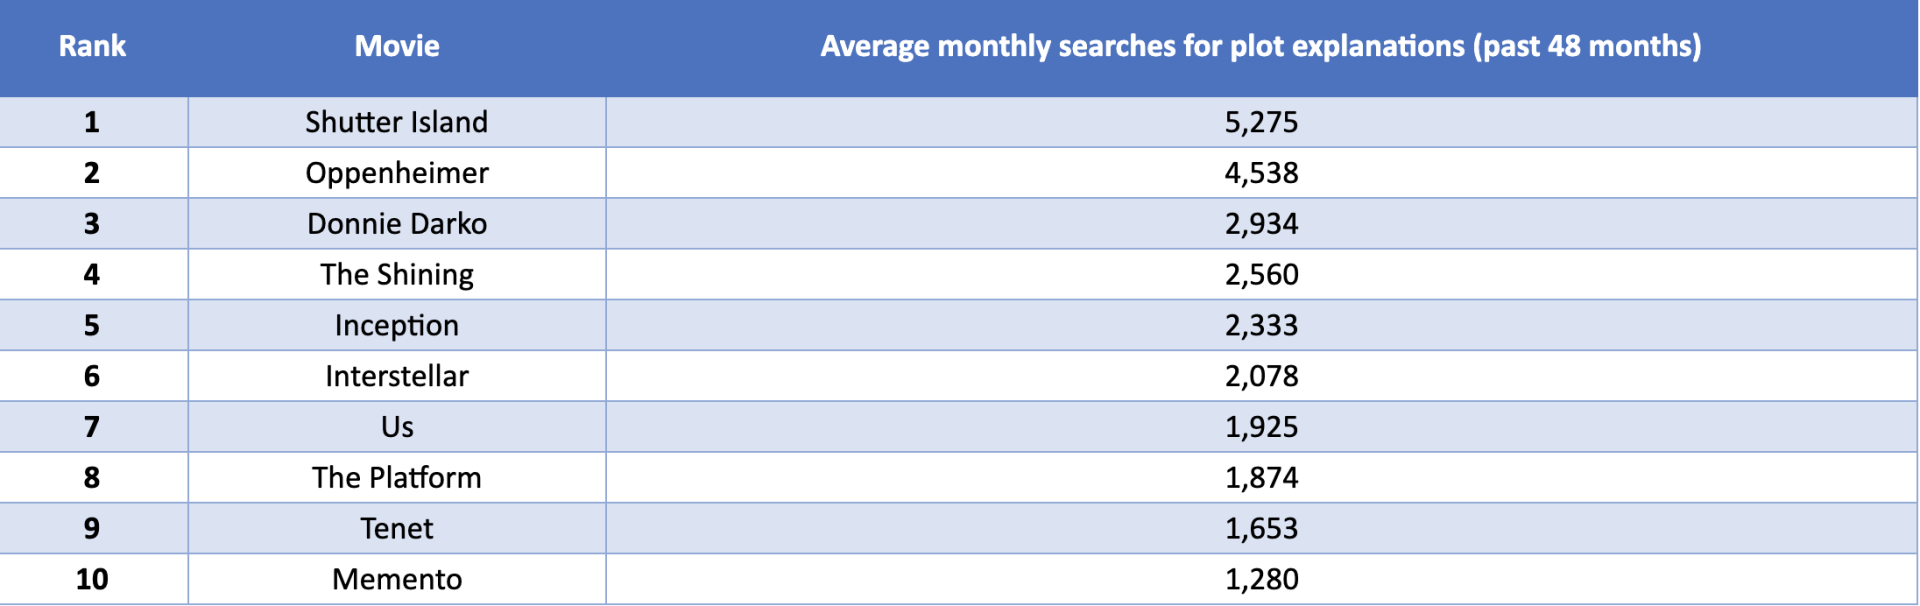 Average_monthly_searches_for_plot_explanations.png